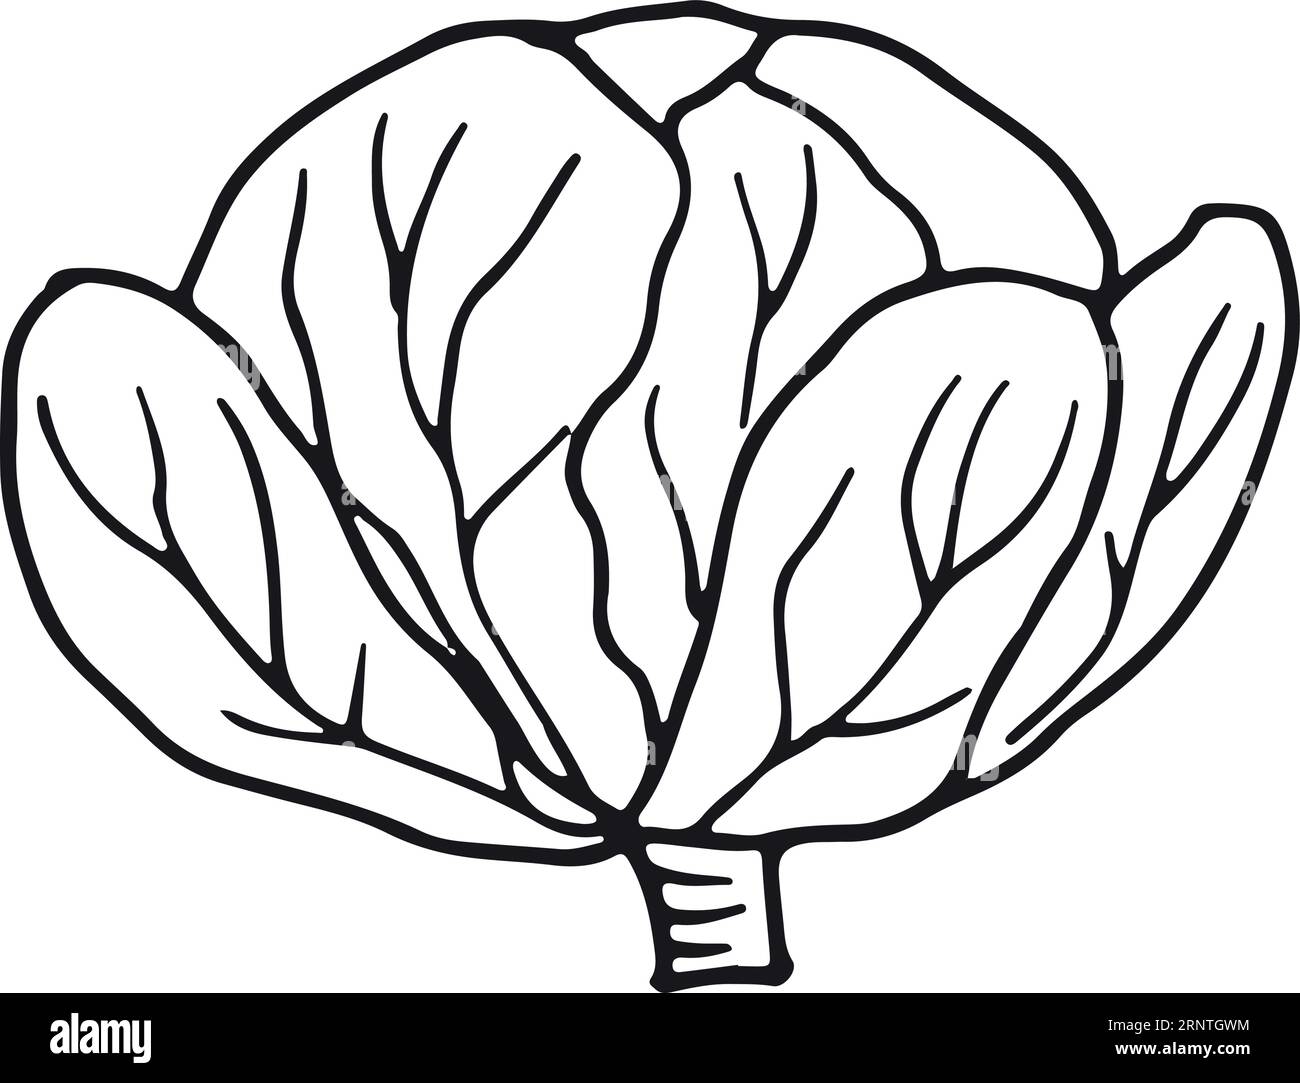 Cabbage icon. Fresh vegetable drawing. Linear farm food Stock Vector